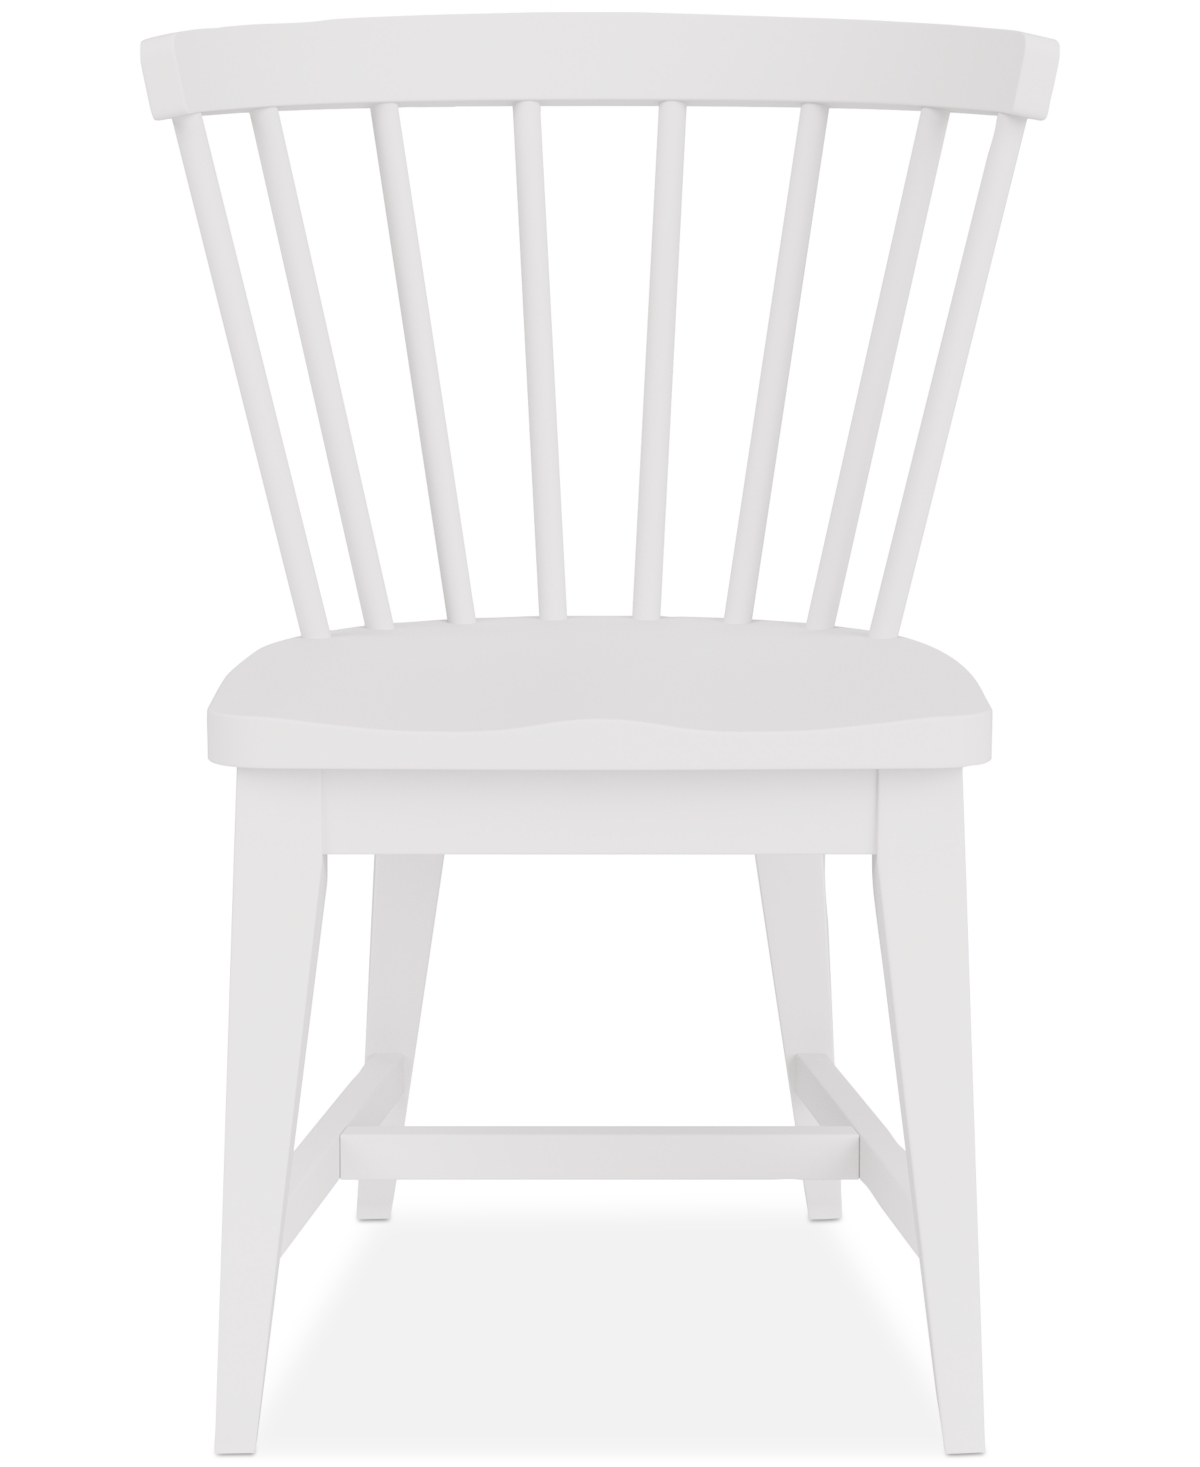 Macy's Catriona 2 Pc. Wood Side Chair Set In White